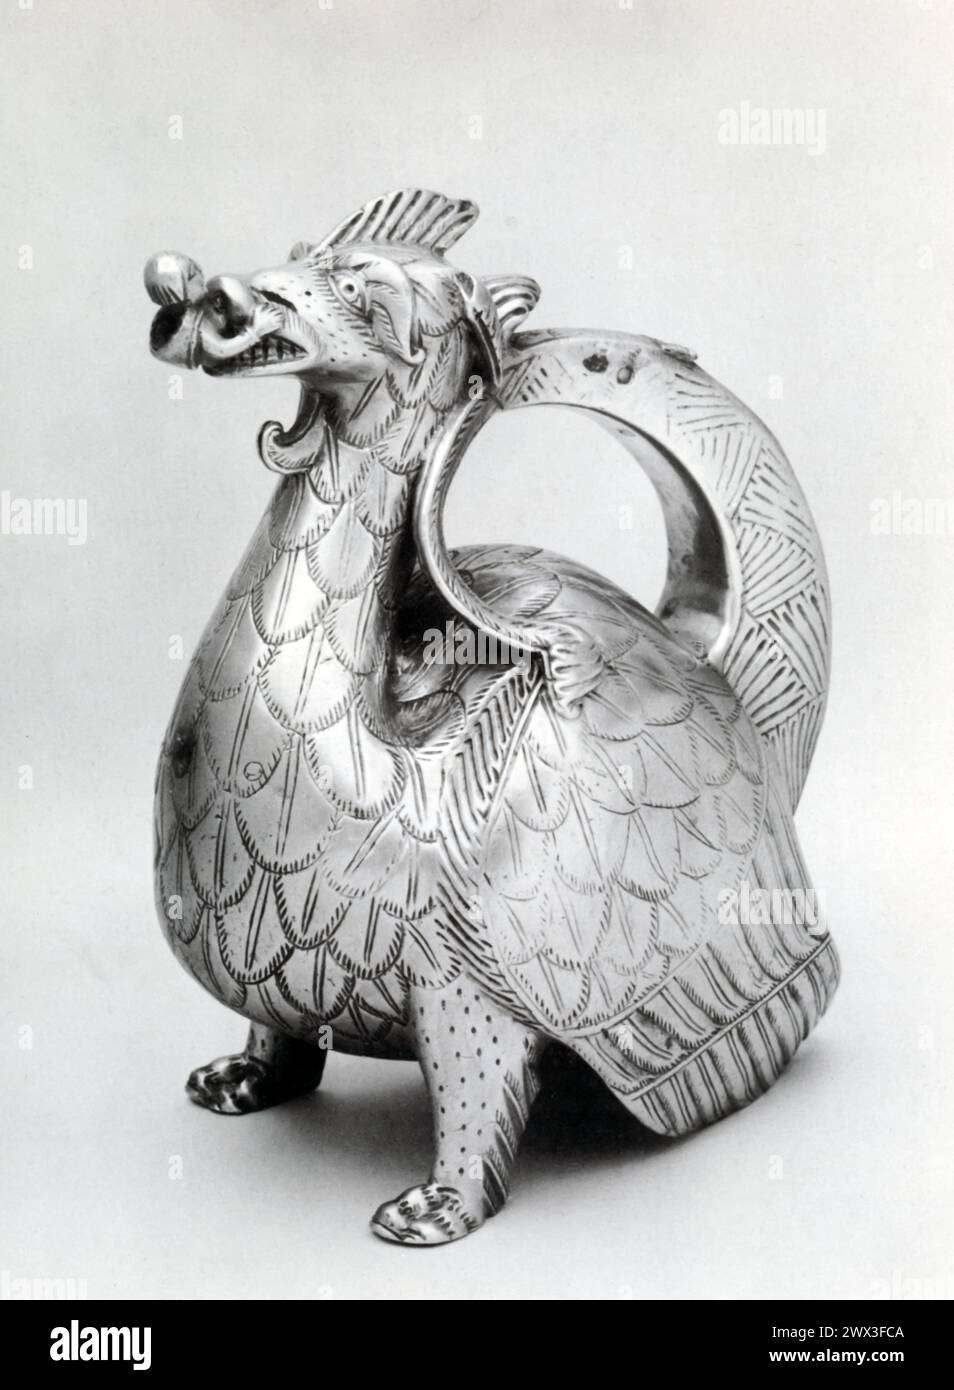 A bronze aquamanile in the form of a dragon swallowing a man, originating from Germany and dating back to the 12th-13th century. Aquamaniles, vessels used for washing hands at dining tables and in liturgical services, were common in the medieval period, often crafted into imaginative shapes, including animals and mythical creatures. Stock Photo